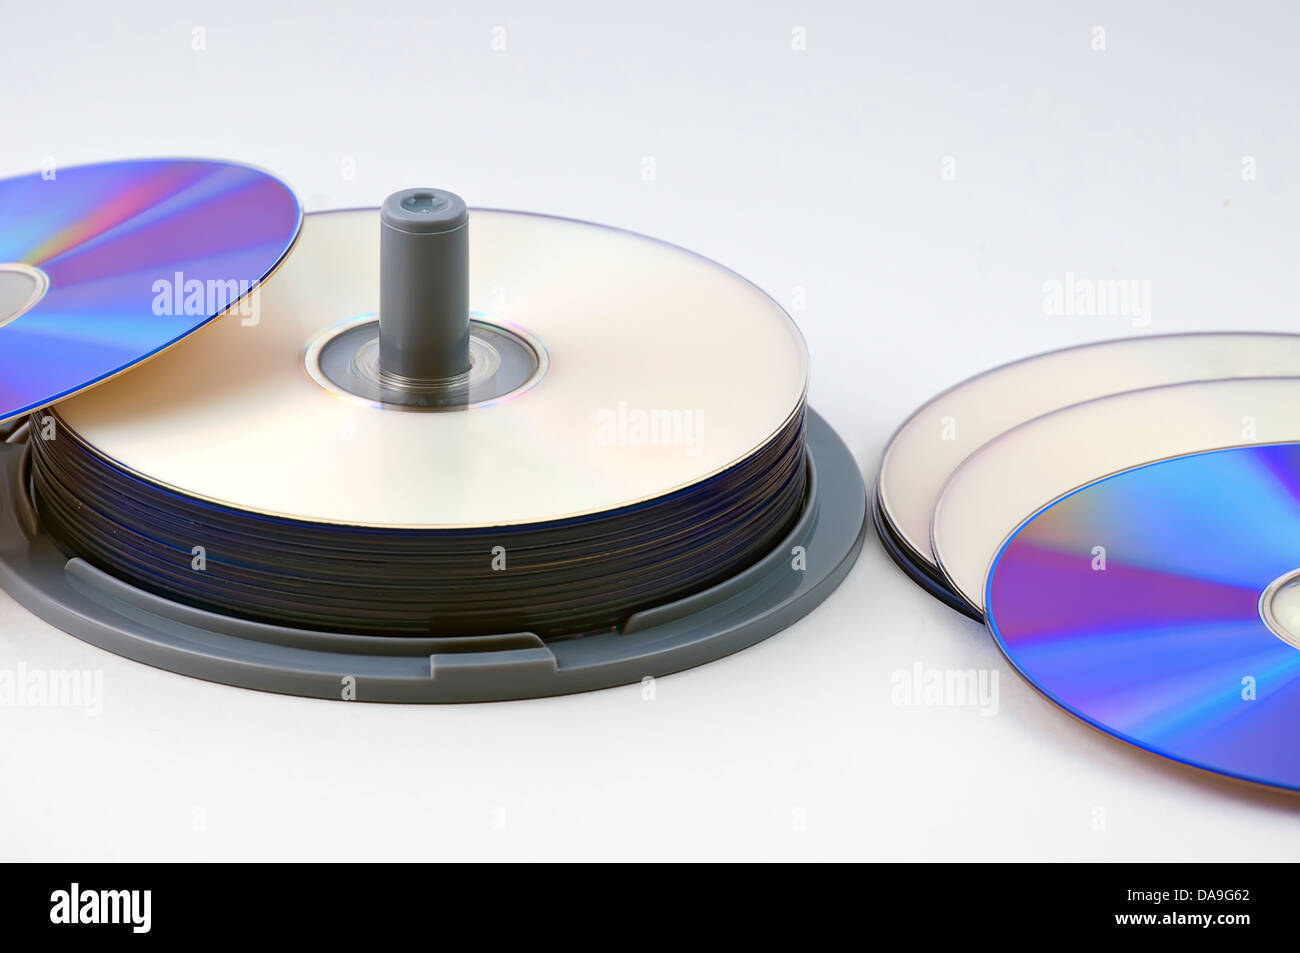 CD-R data discs in a stack with several laid out on the desk Stock Photo